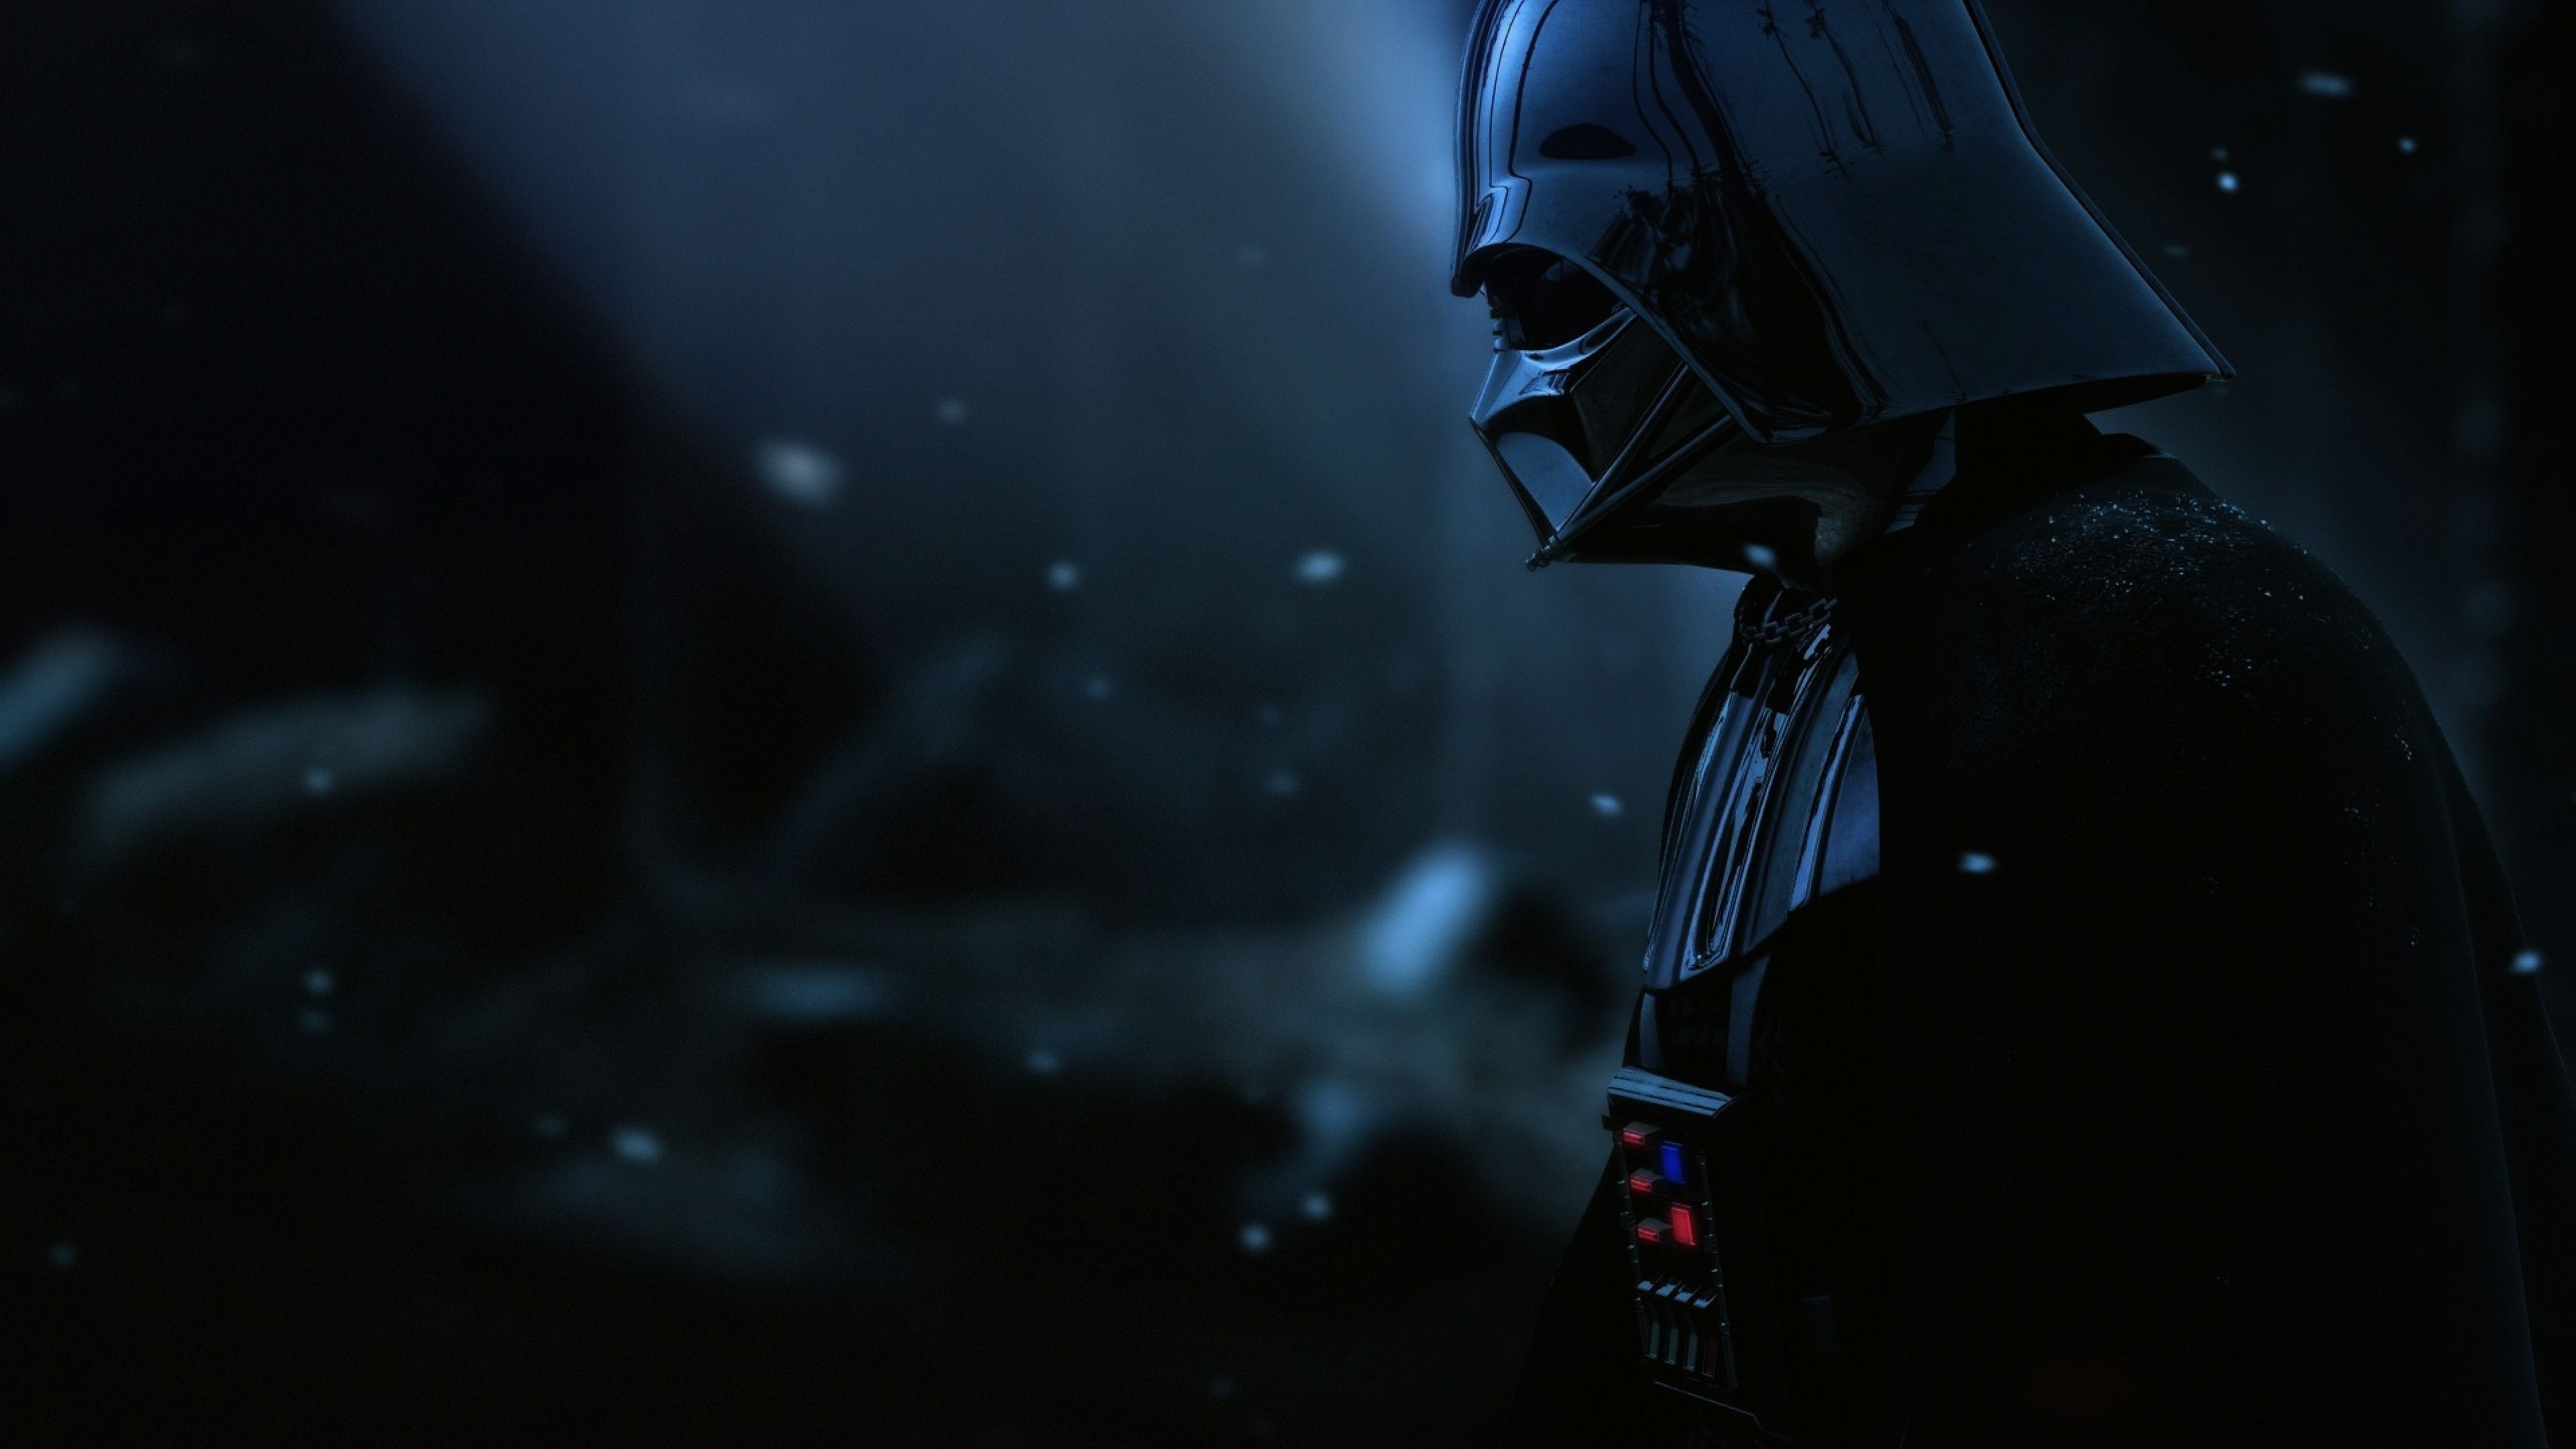 Sith: An ancient religious order of Force-wielders devoted to the dark side of the Force. 3840x2160 4K Wallpaper.